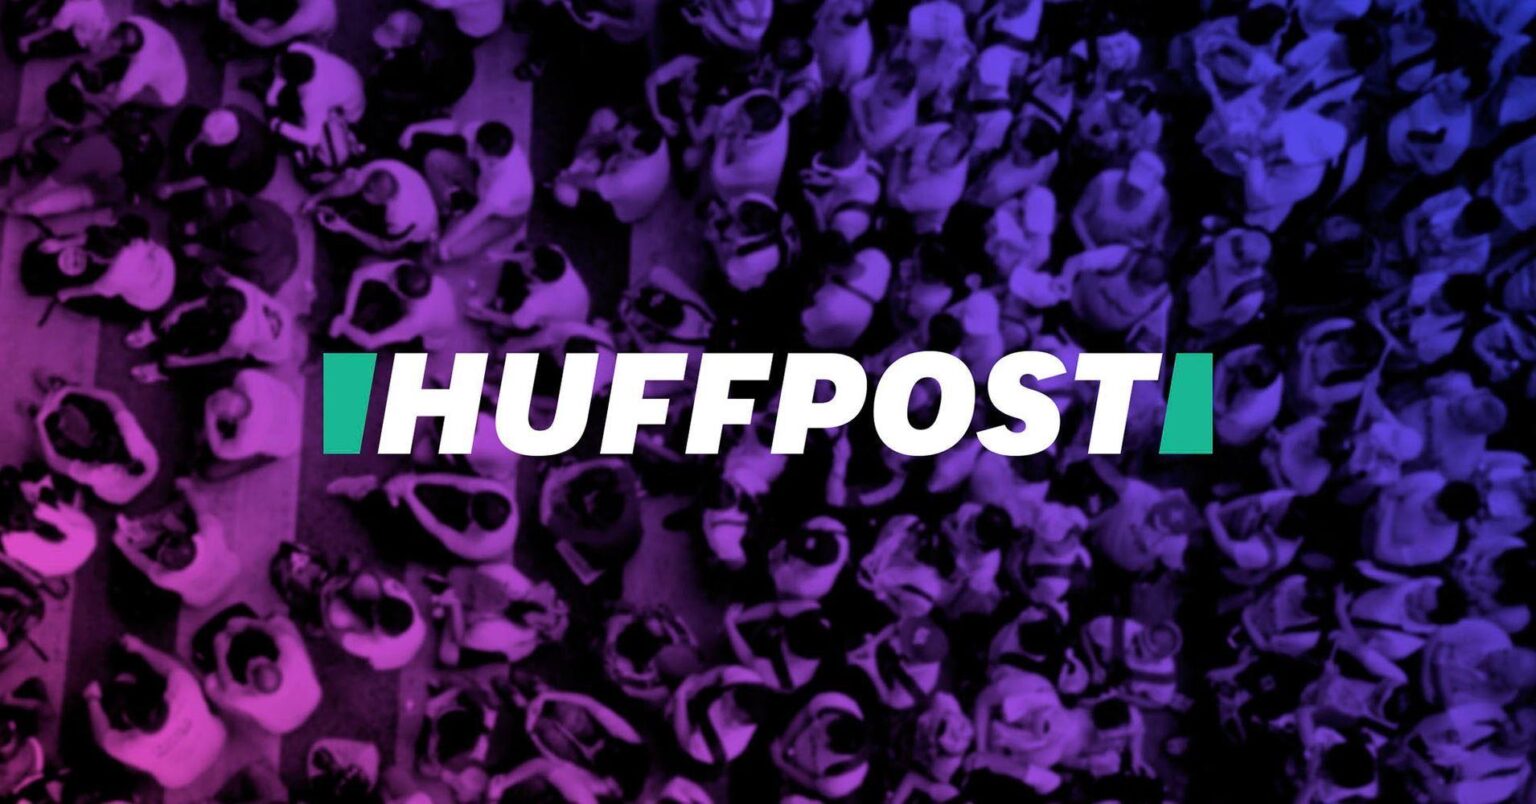 The HuffPost has waved goodbye to nearly one-third of its news staff. Is Buzzfeed to blame? Check out the full scoop from those close to the situation.